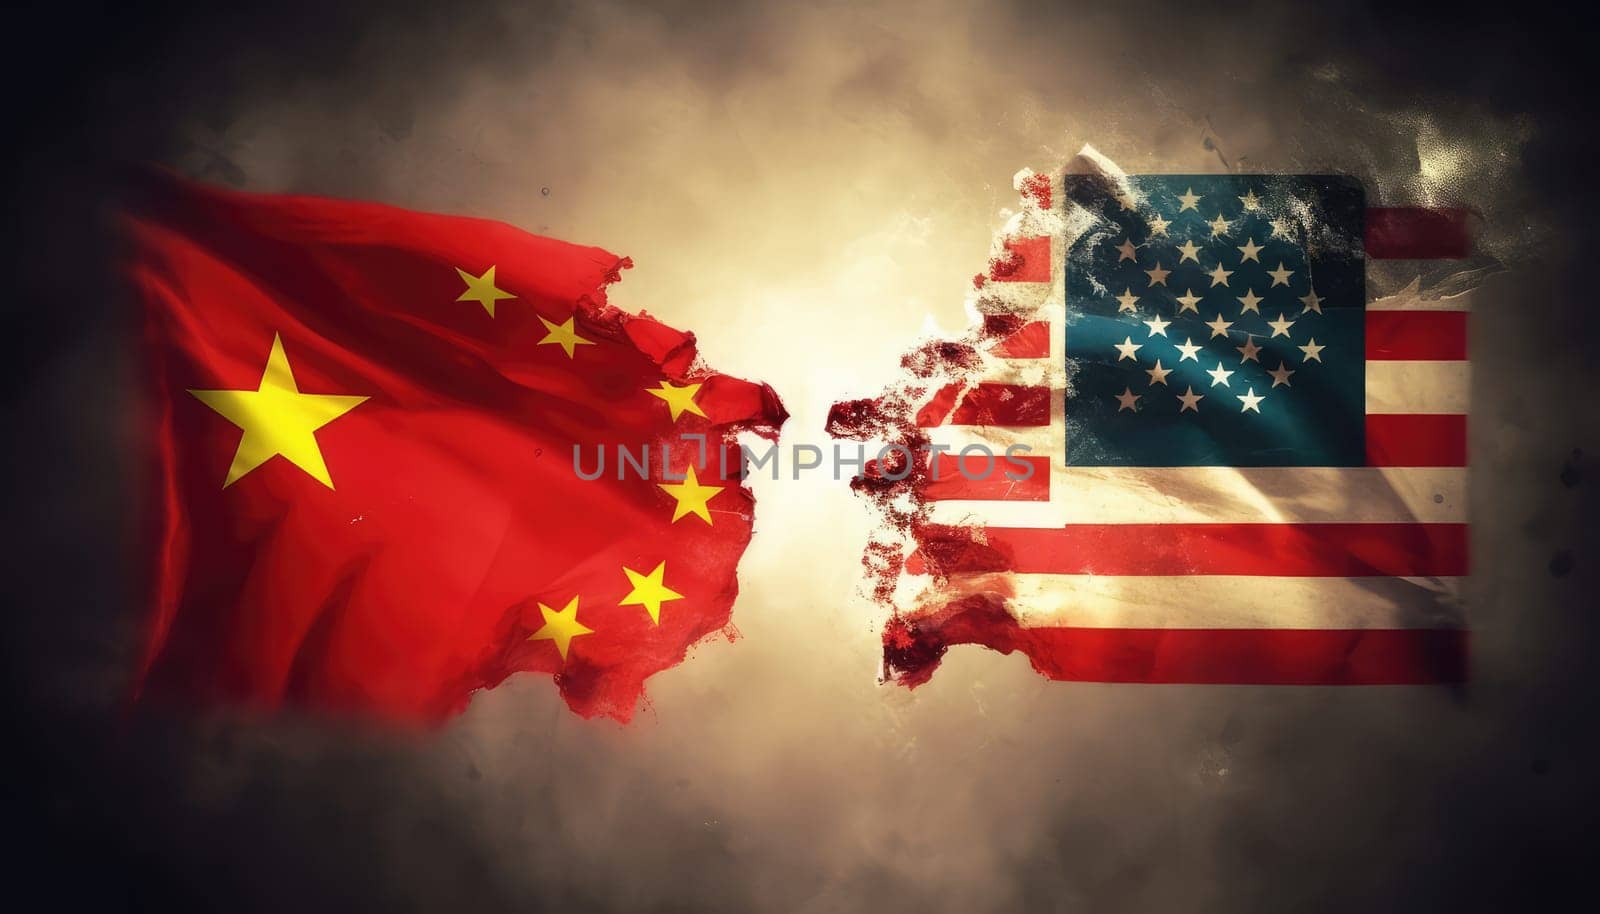 Dynamic Illustration of Torn Flags of China and USA, Symbolizing Diplomatic Tension.